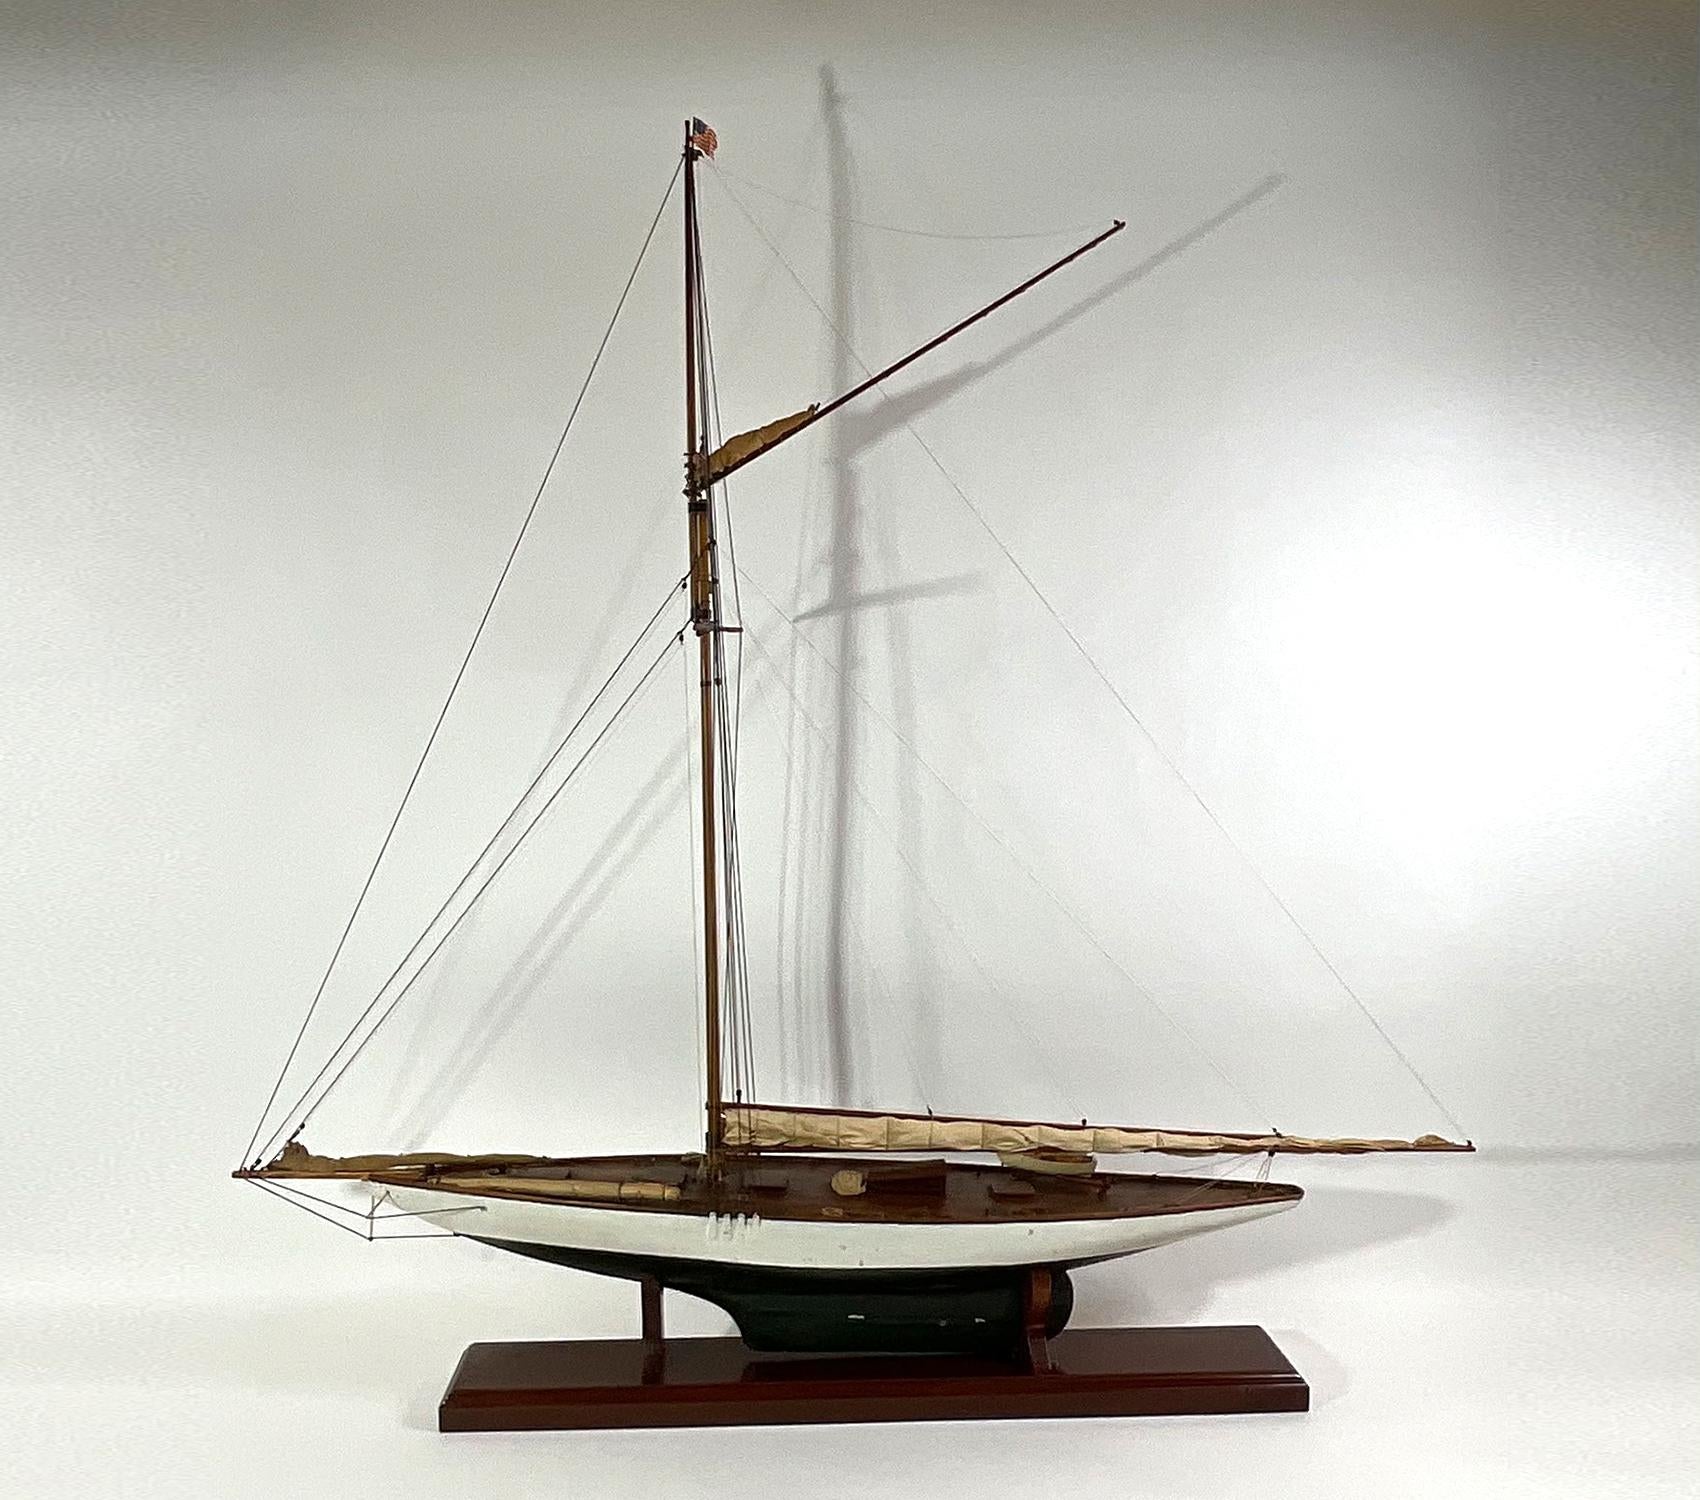 Antique yacht model with varnished deck, cabins, hatches, launch on davits. Hull is fitted with a lead keel. Hull is painted green below the waterline and white above. Furled sail is lashed to the boom. Two more sails are lashed to the bow and